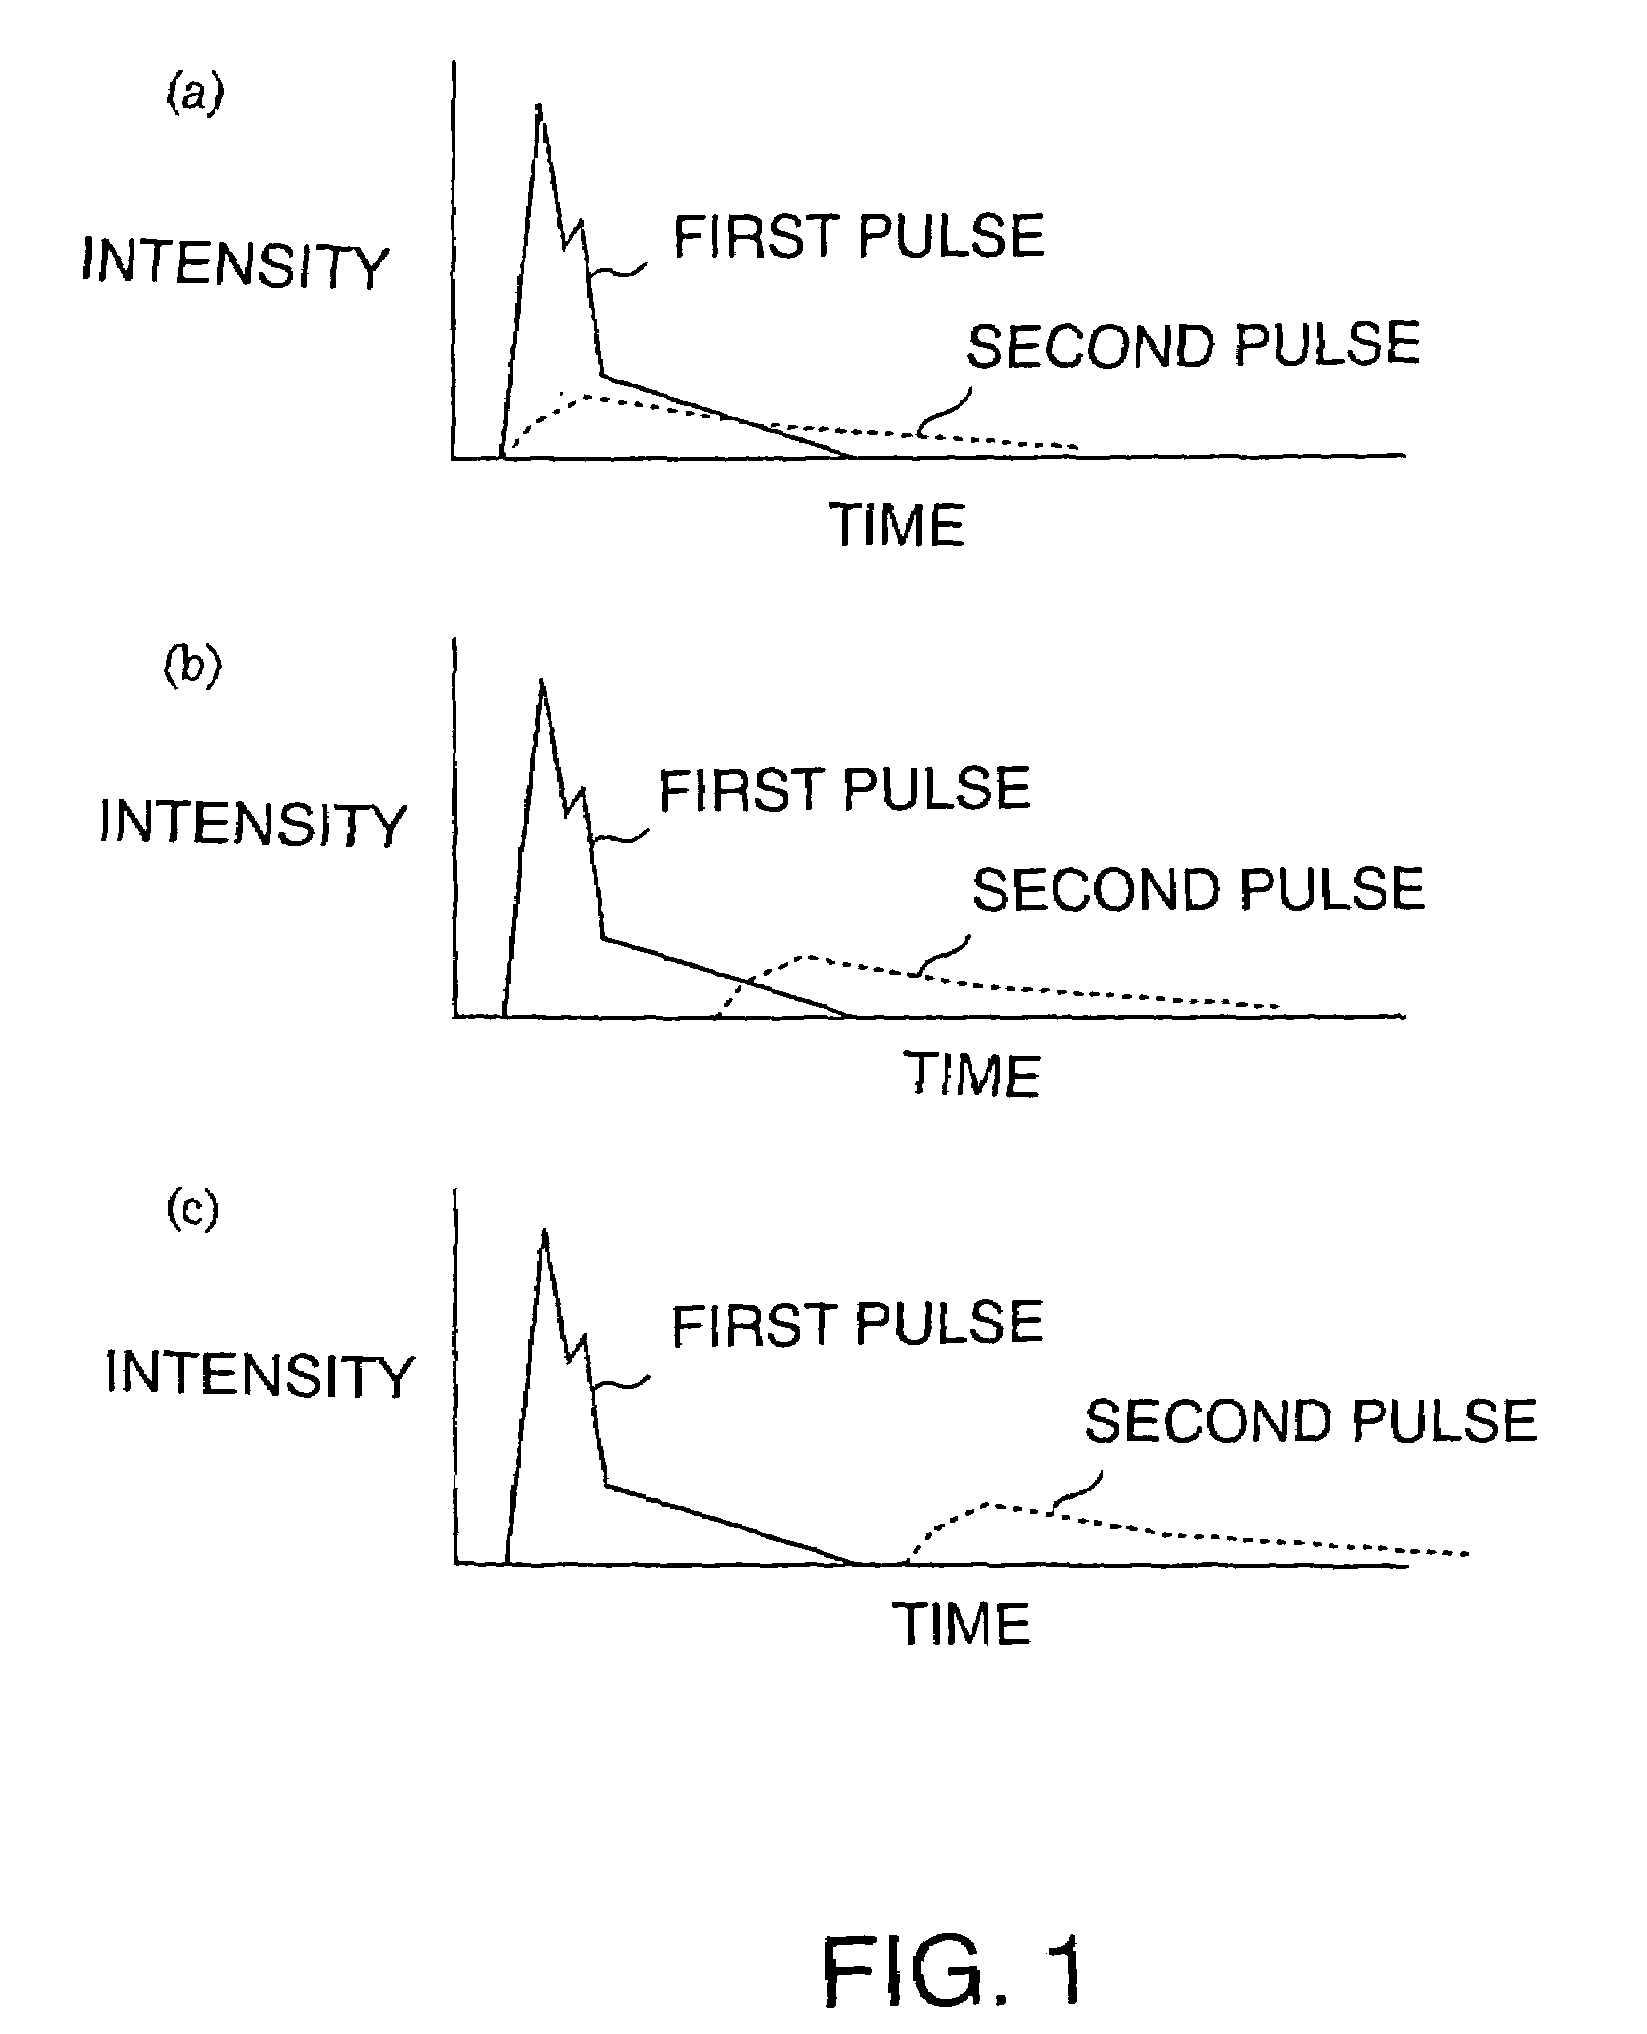 Thin film processing method and thin film processing apparatus including controlling the cooling rate to control the crystal sizes